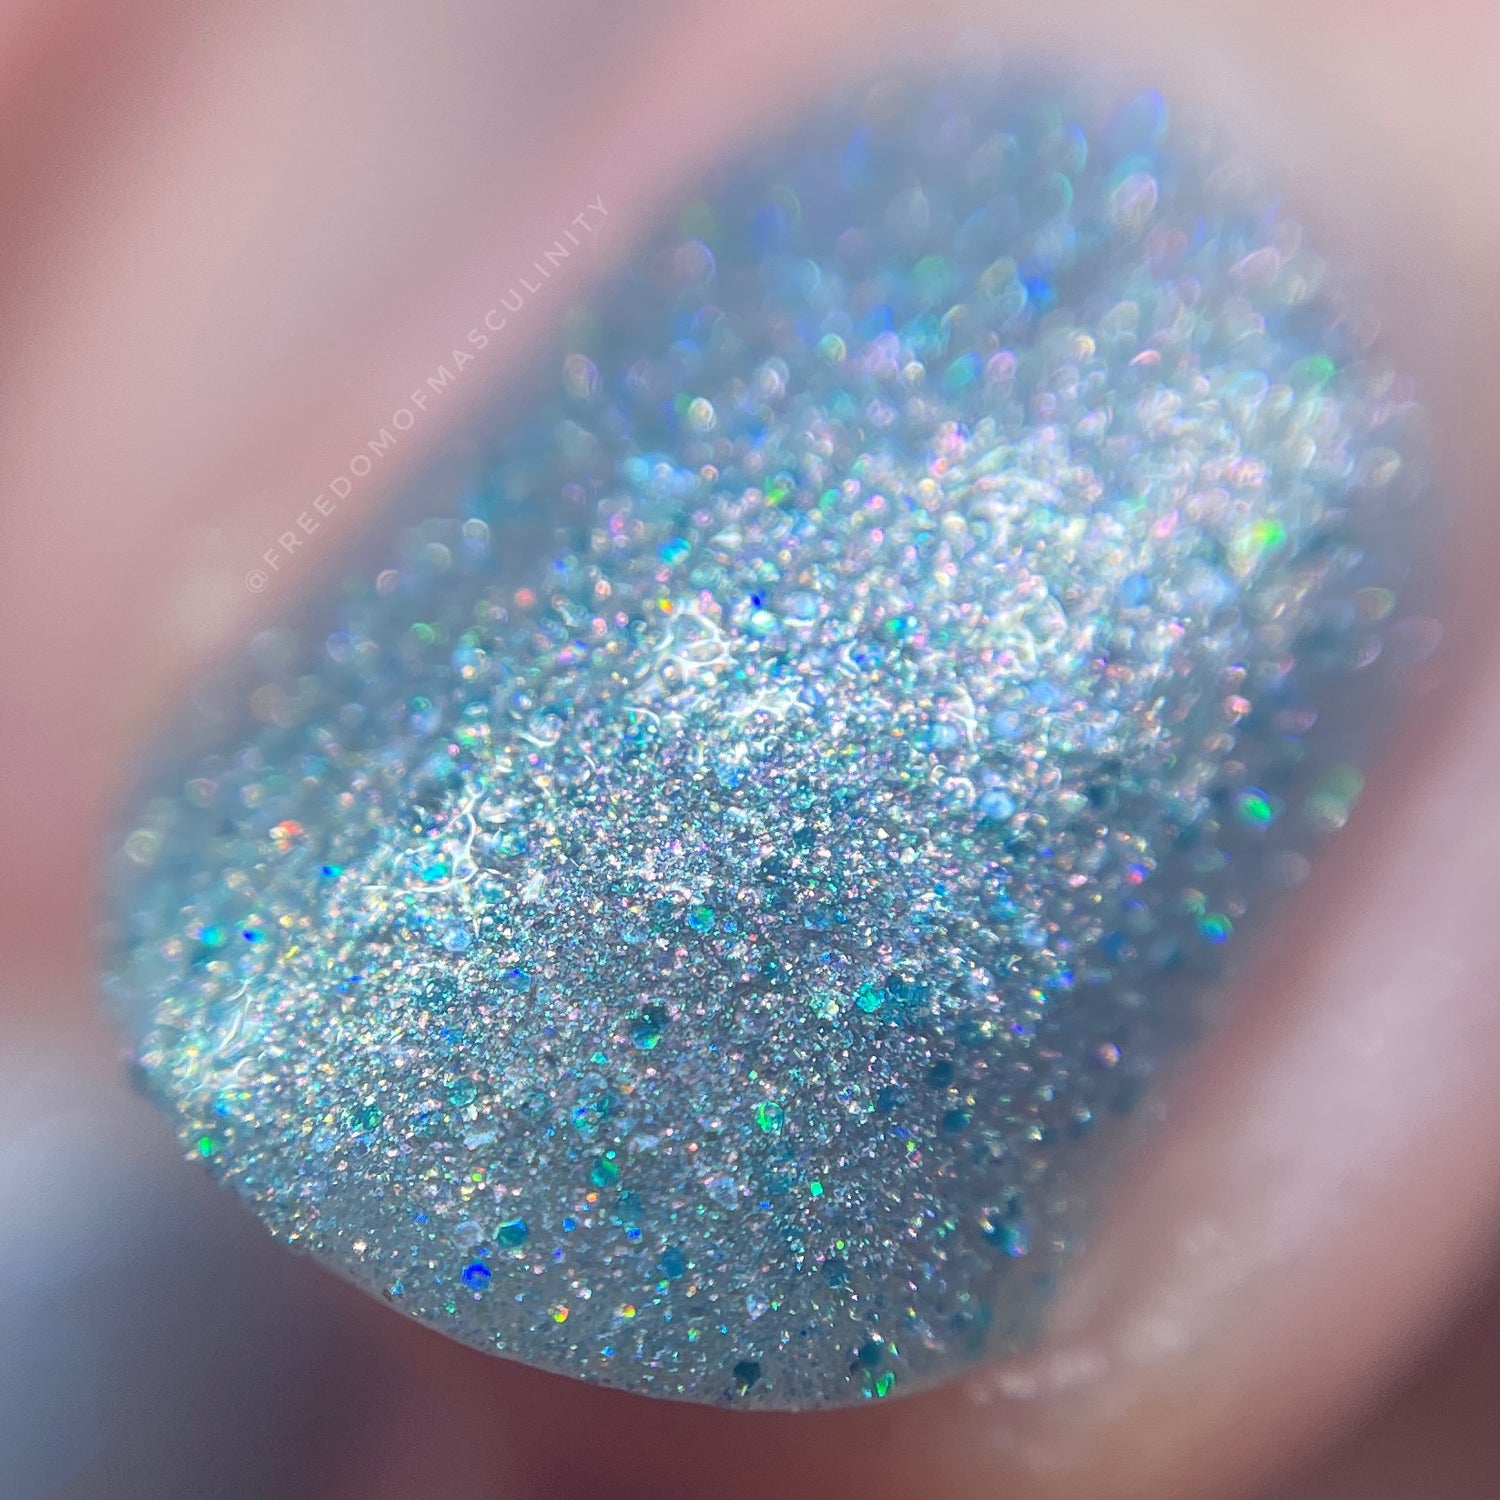 extreme closeup of Watch This blue base coat and pink shimmer